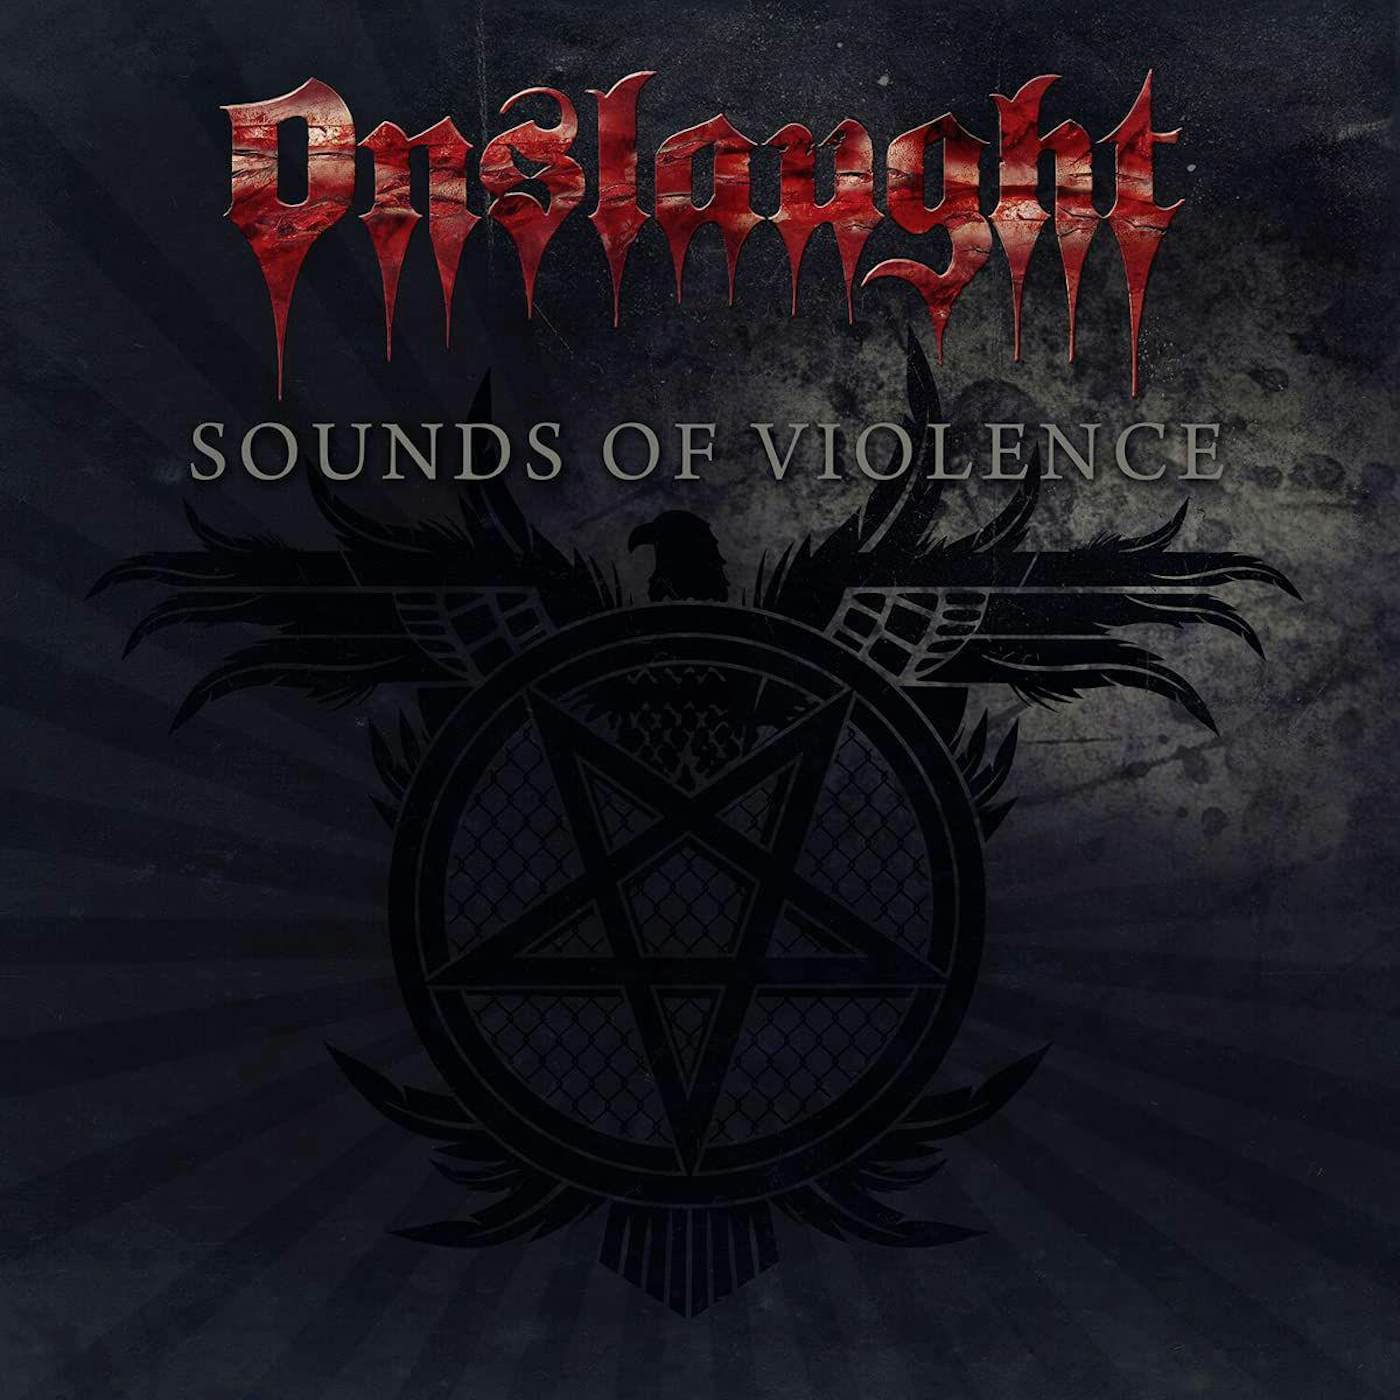 Onslaught Sounds Of Violence (Anniversary Edition/red) Vinyl Record